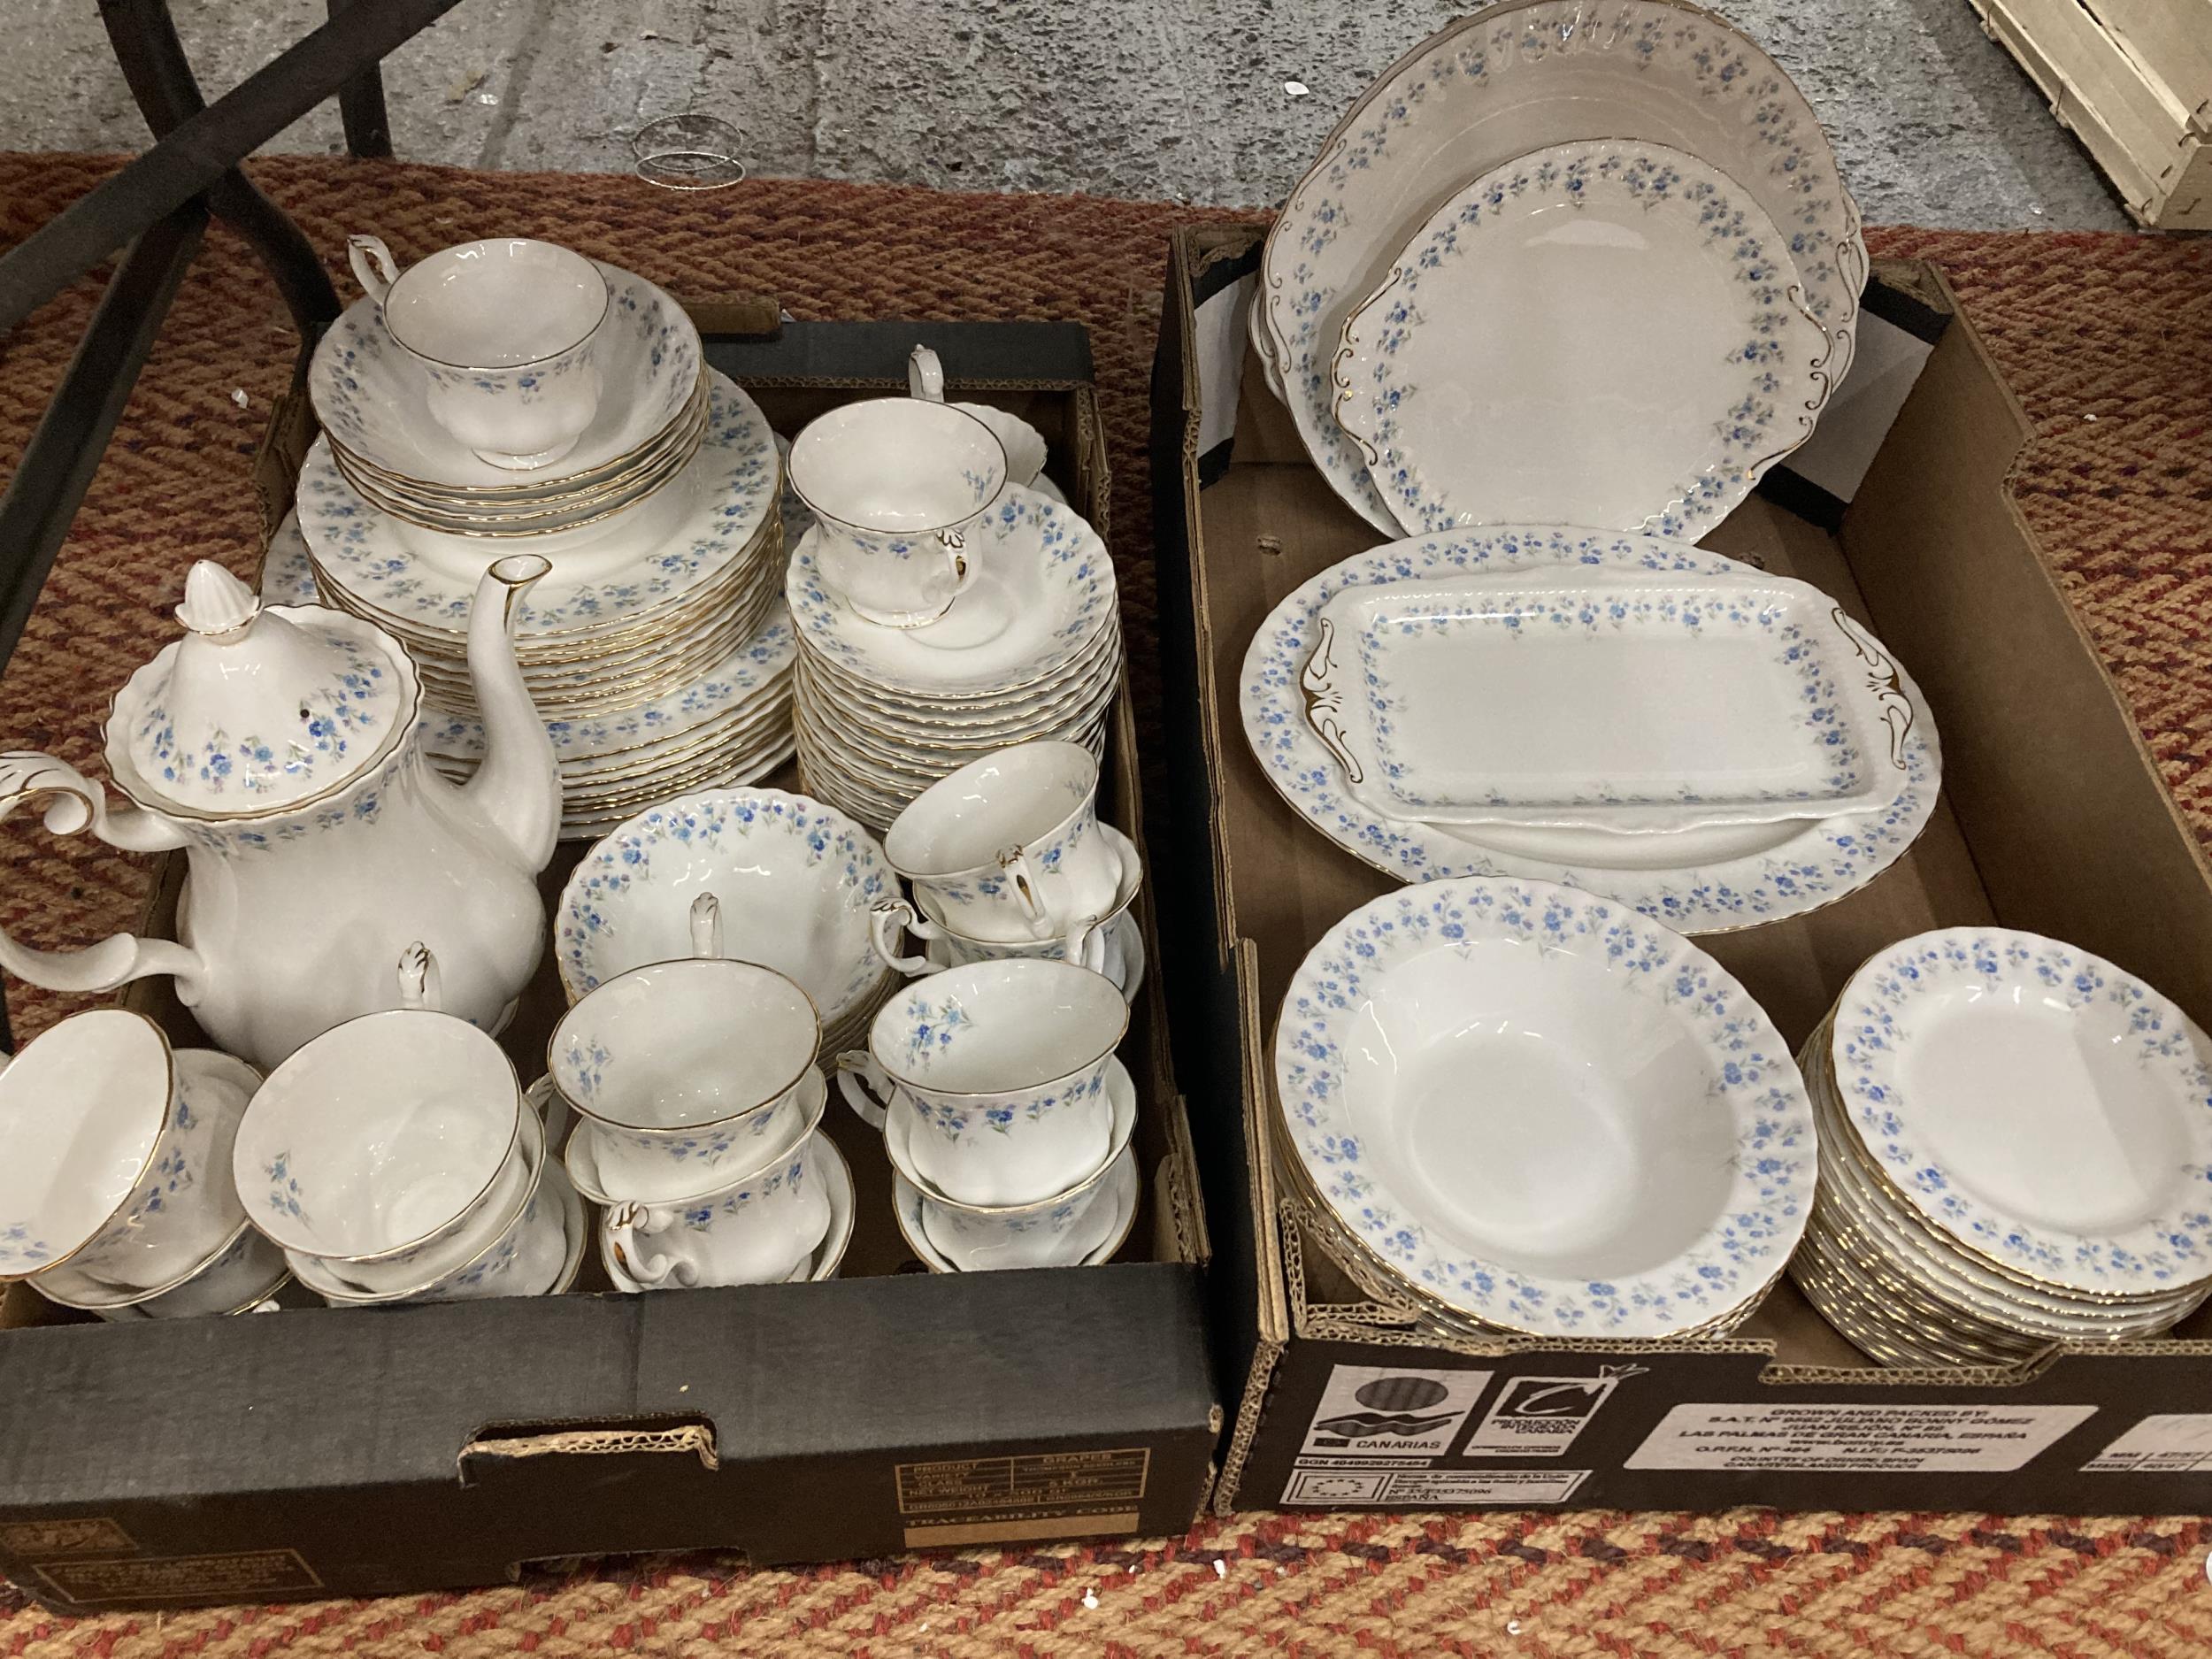 A LARGE QUANTITY OF ROYAL ALBERT 'MEMORY LANE' TEA AND DINNER WARE TO INCLUDE A COFFEE POT, CUPS,